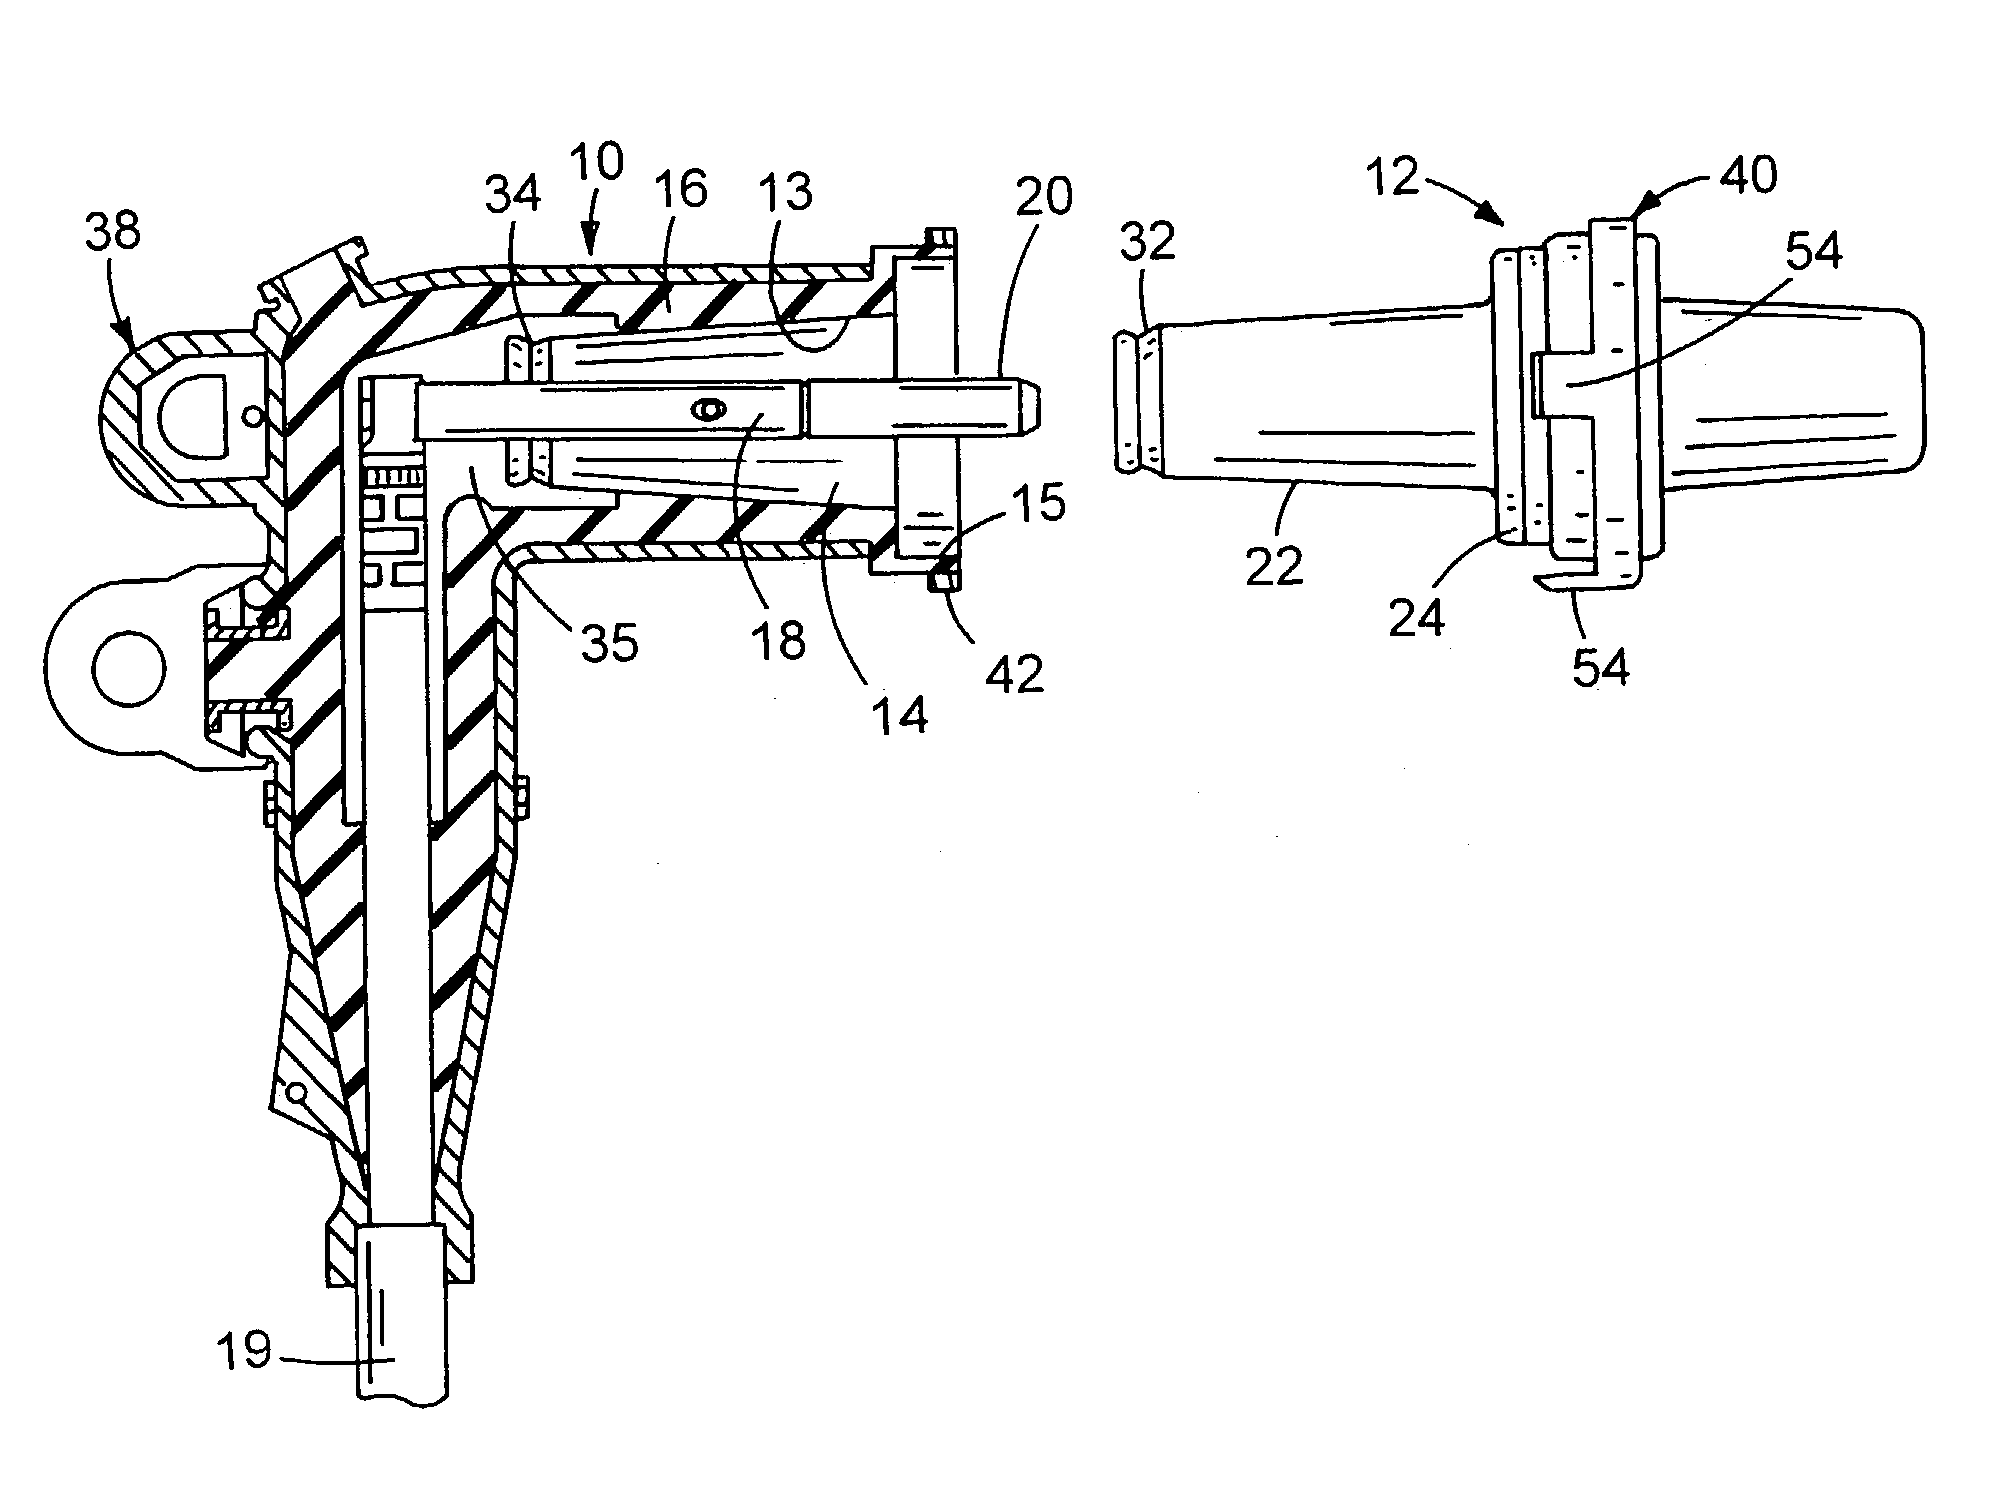 Visual latching indicator arrangement for an electrical bushing and terminator